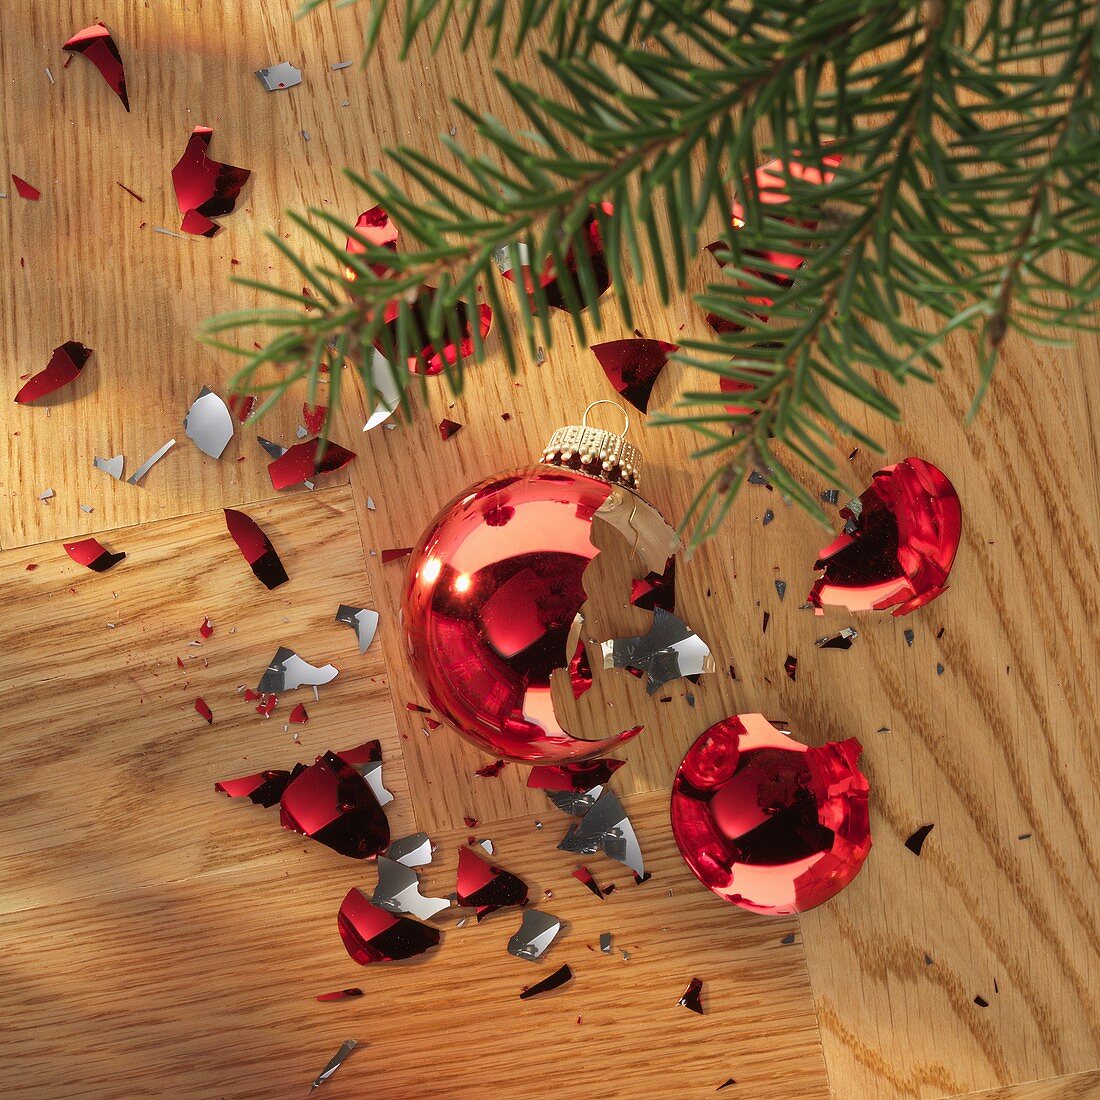 Shattered Christmas bauble